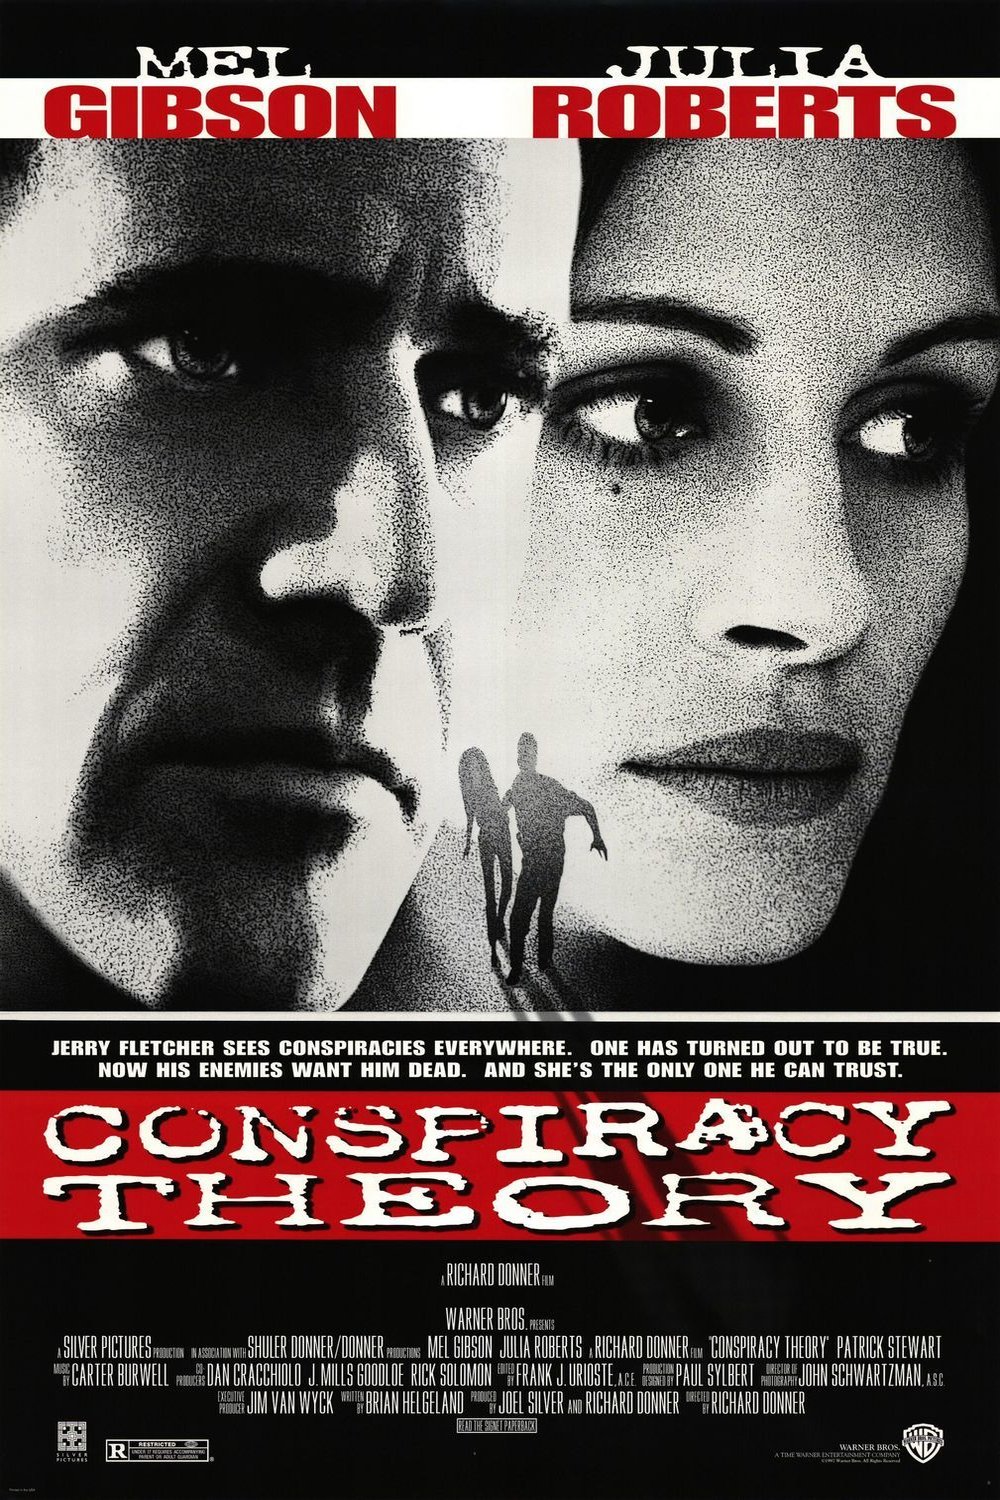 Poster of the movie Conspiracy Theory